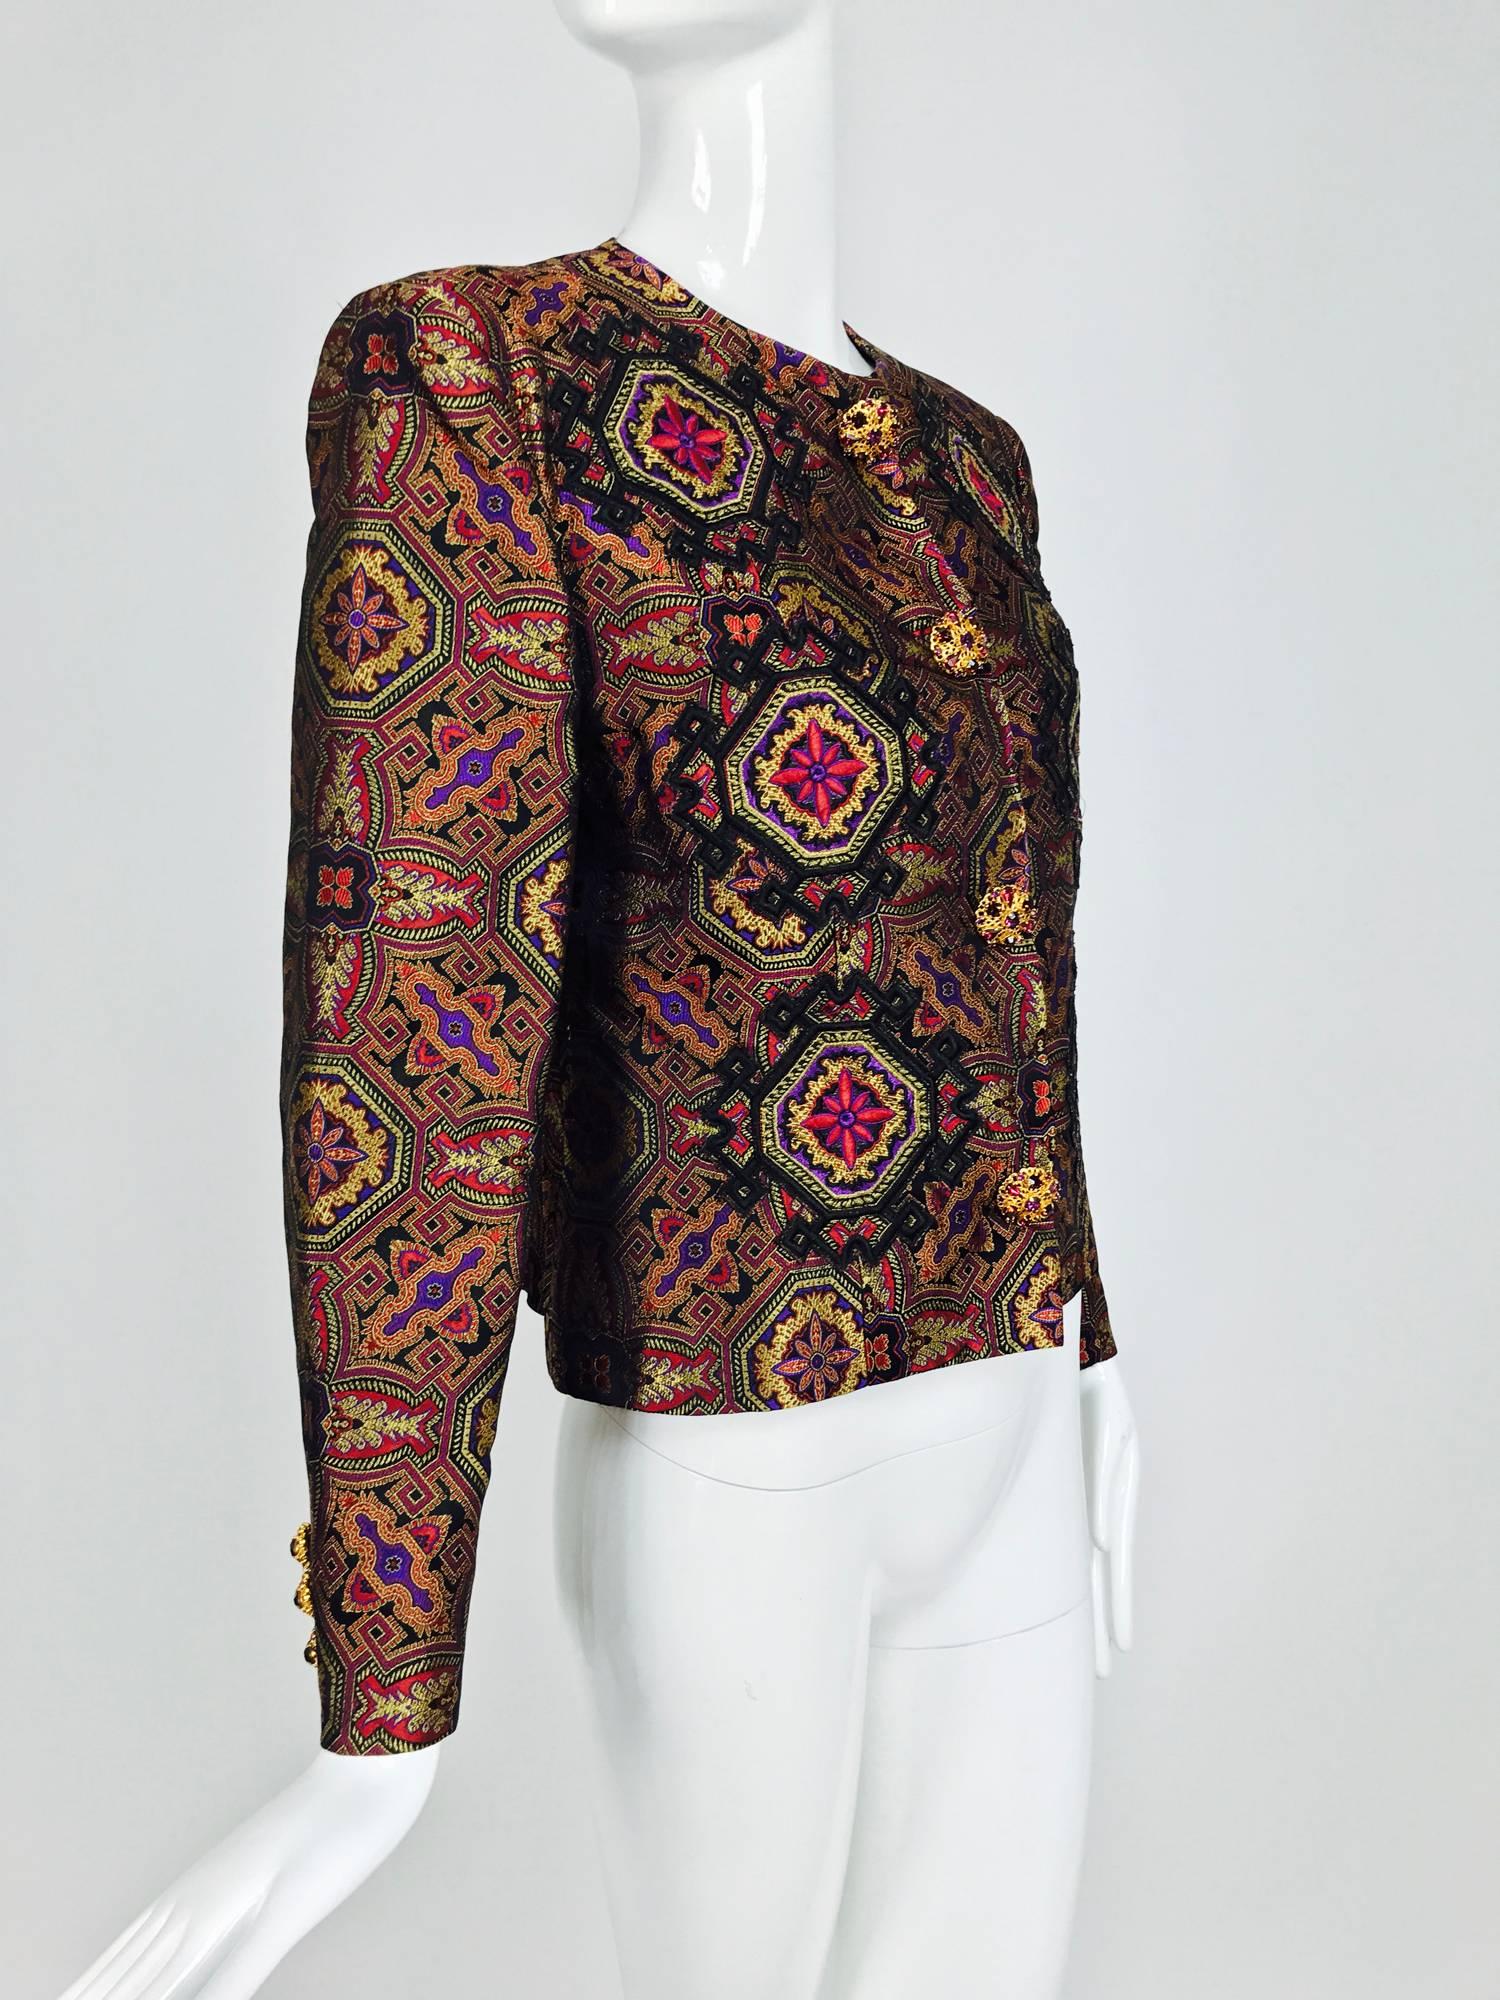 Christian LaCroix silky jewel tone brocade jacket with appliques on the front and a large metallic embroidered applique on the back...Round neck jacket closes at the front with garnet coloured jeweled buttons, closes with hidden couture snaps, three